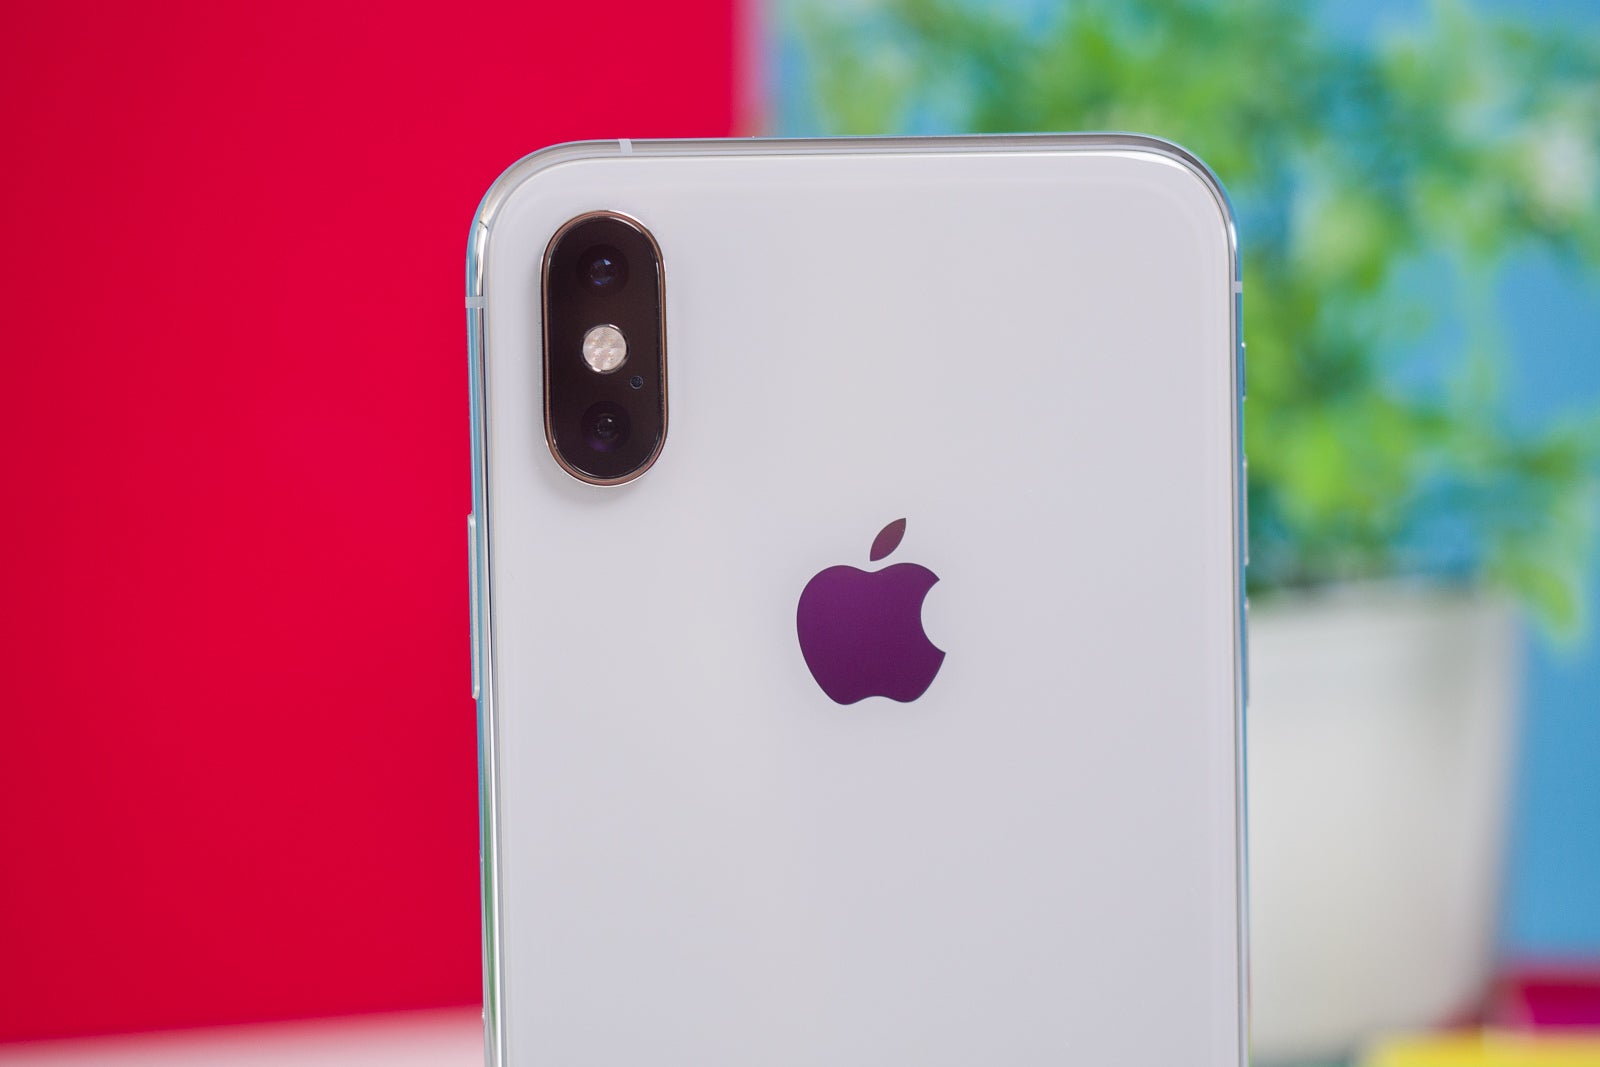 Apple iPhone XS - Apple iPhone XR 2 could borrow key iPhone XS camera feature